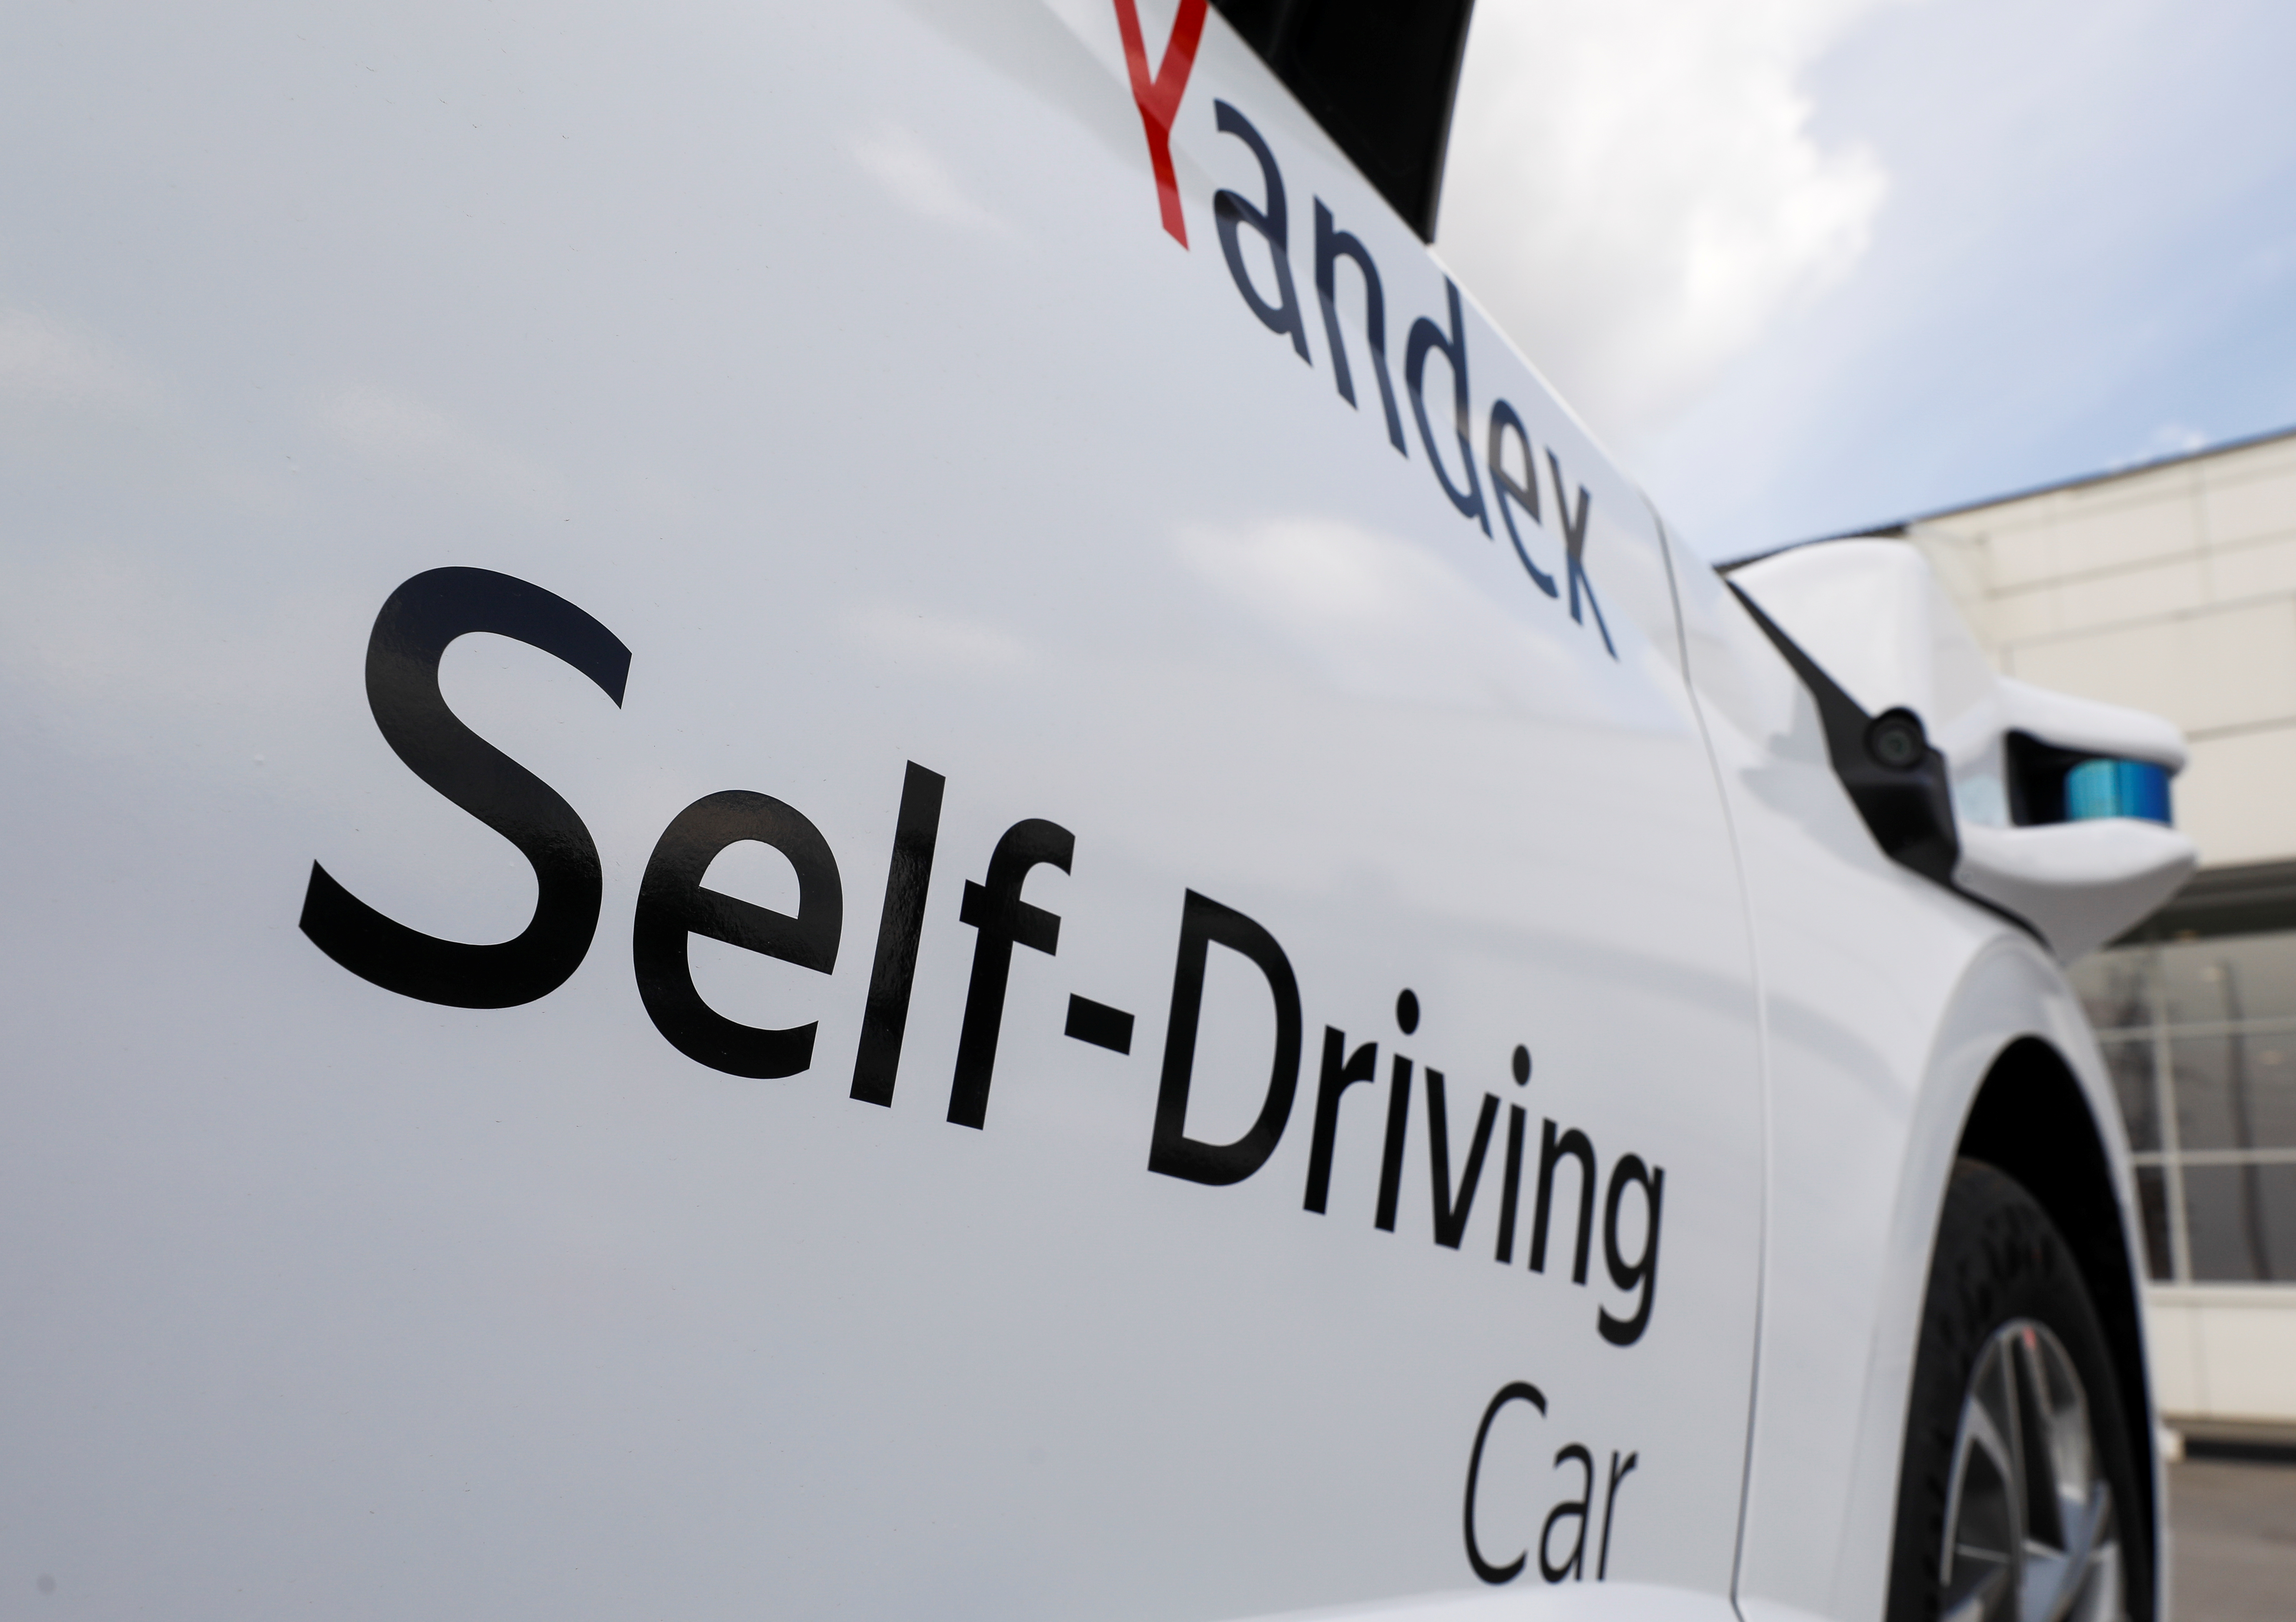 Yandex presents new generation of its self-driving car in Moscow